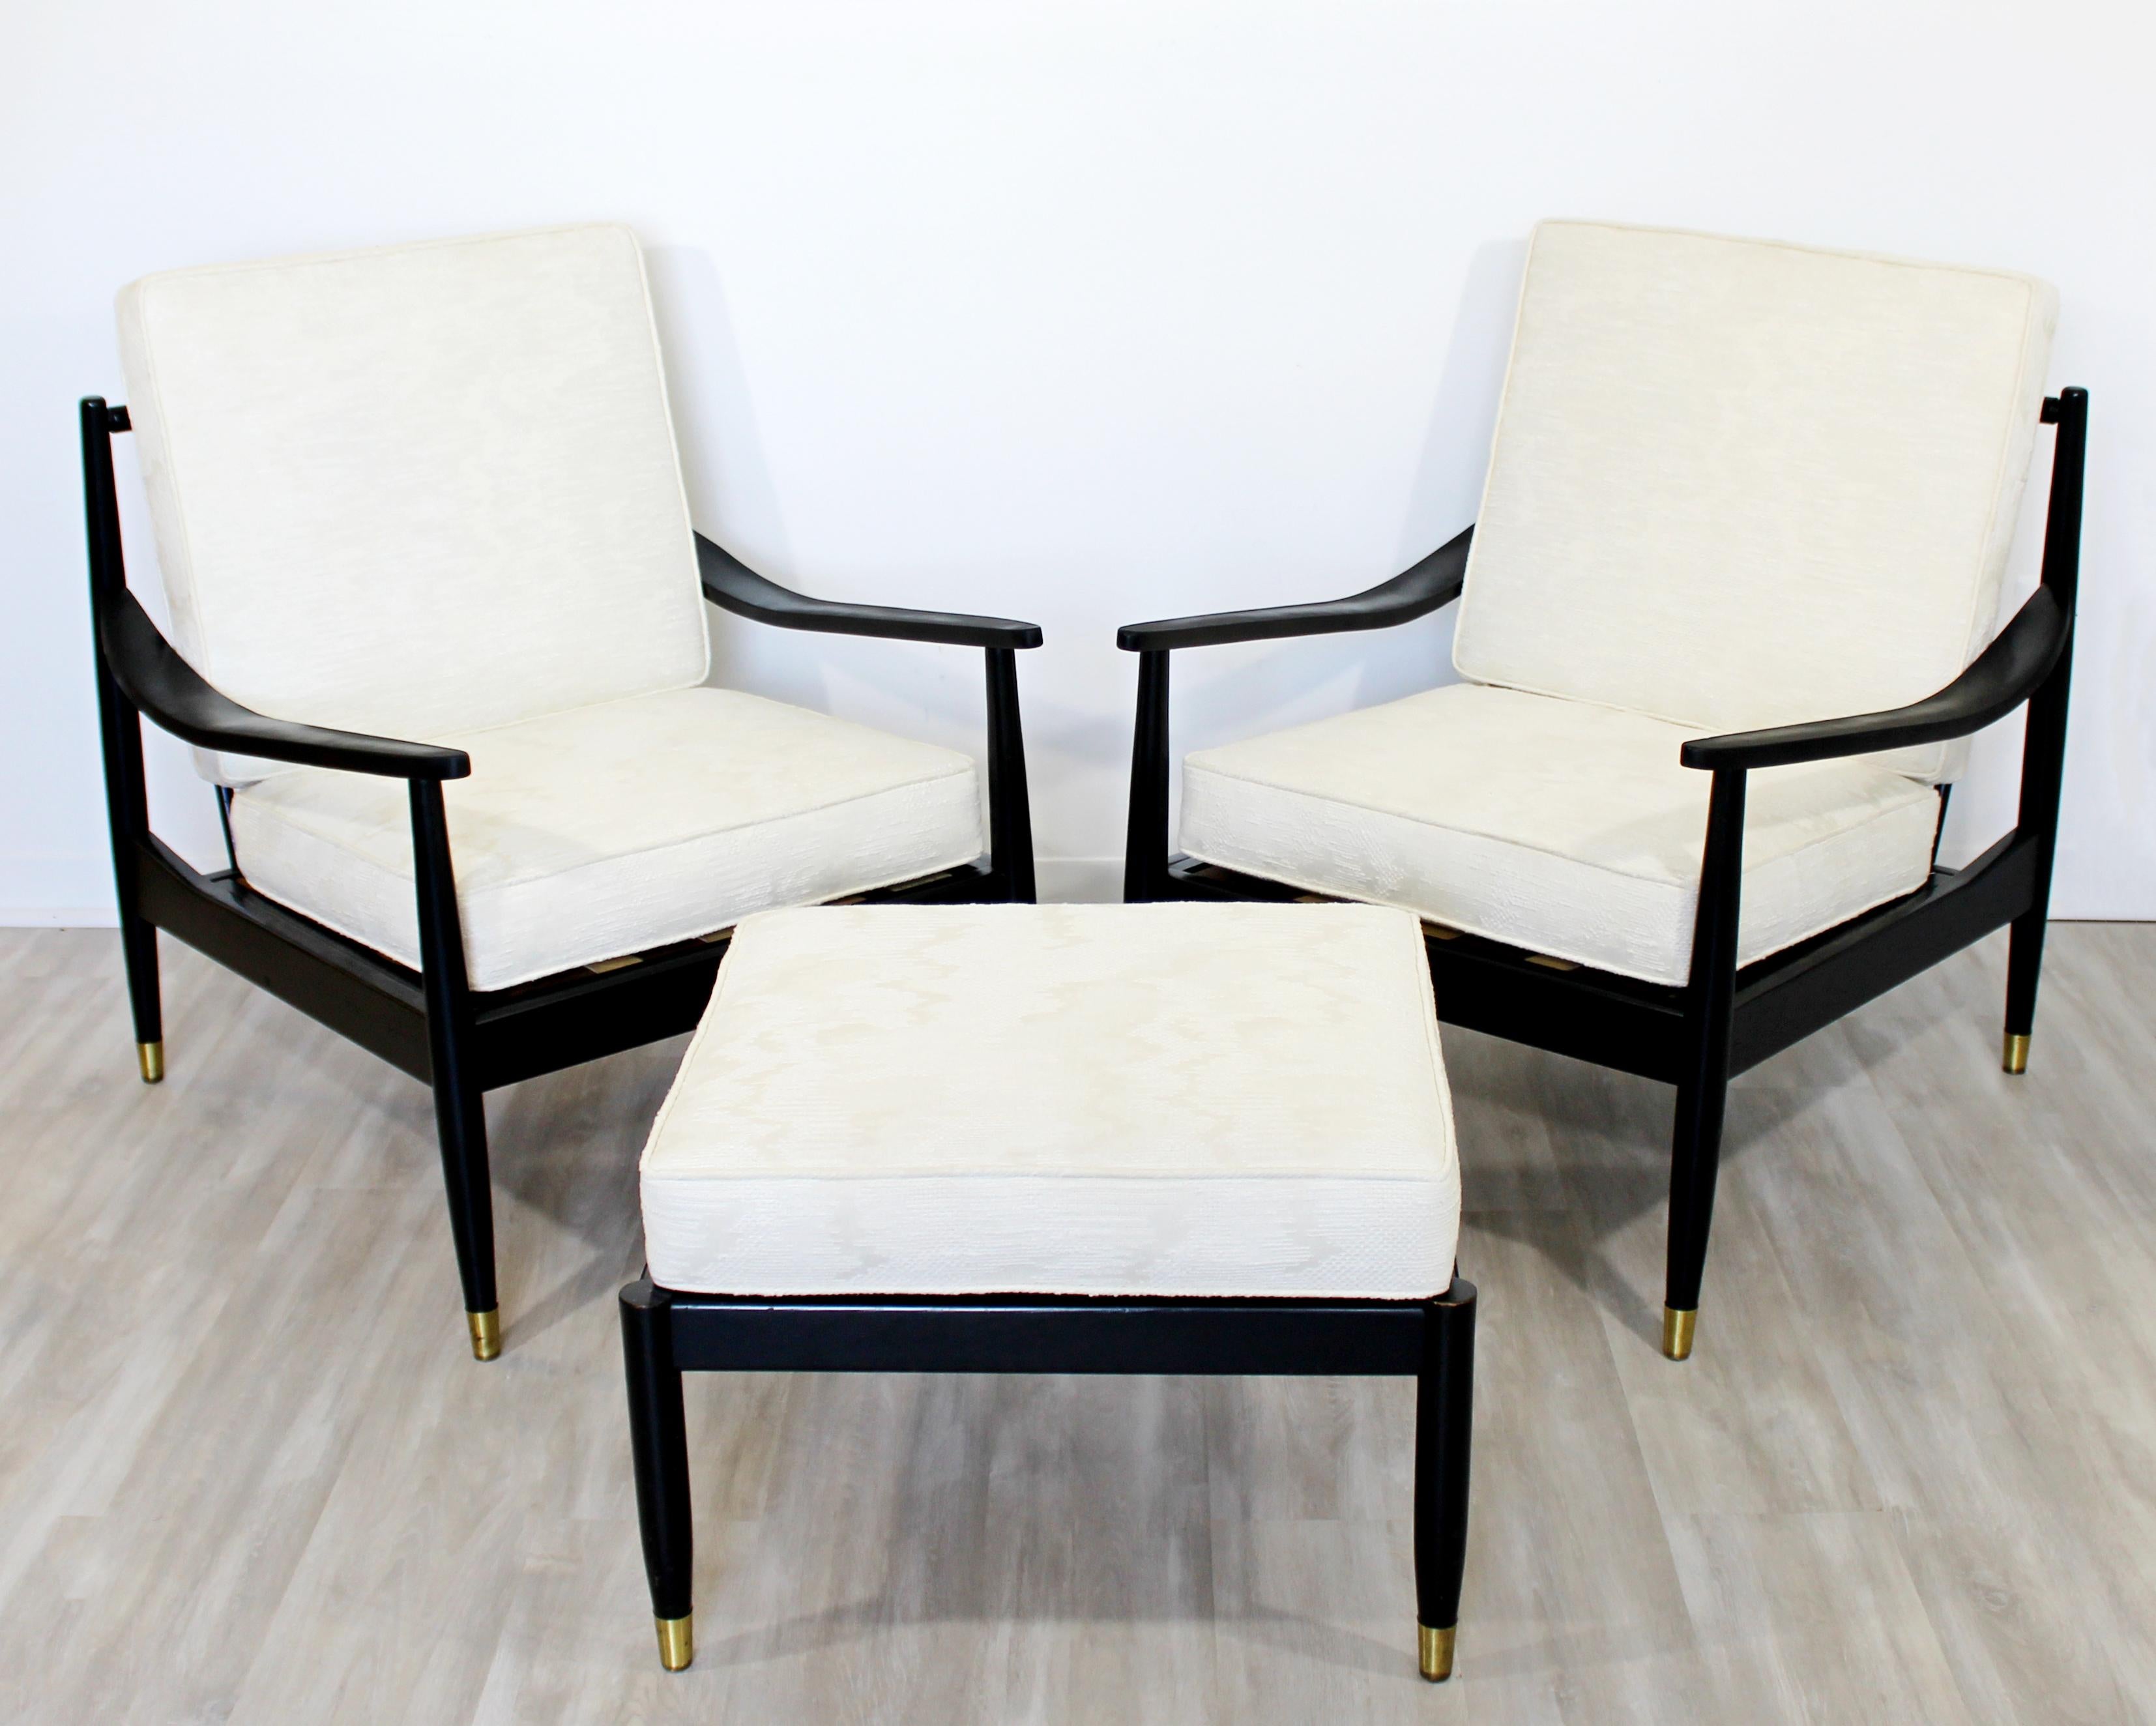 For your consideration is a wonderful pair of black lacquered armchairs, with white upholstery, by Wythe-Craft, circa 1950s. In very good vintage condition. The dimensions of the chairs are 29